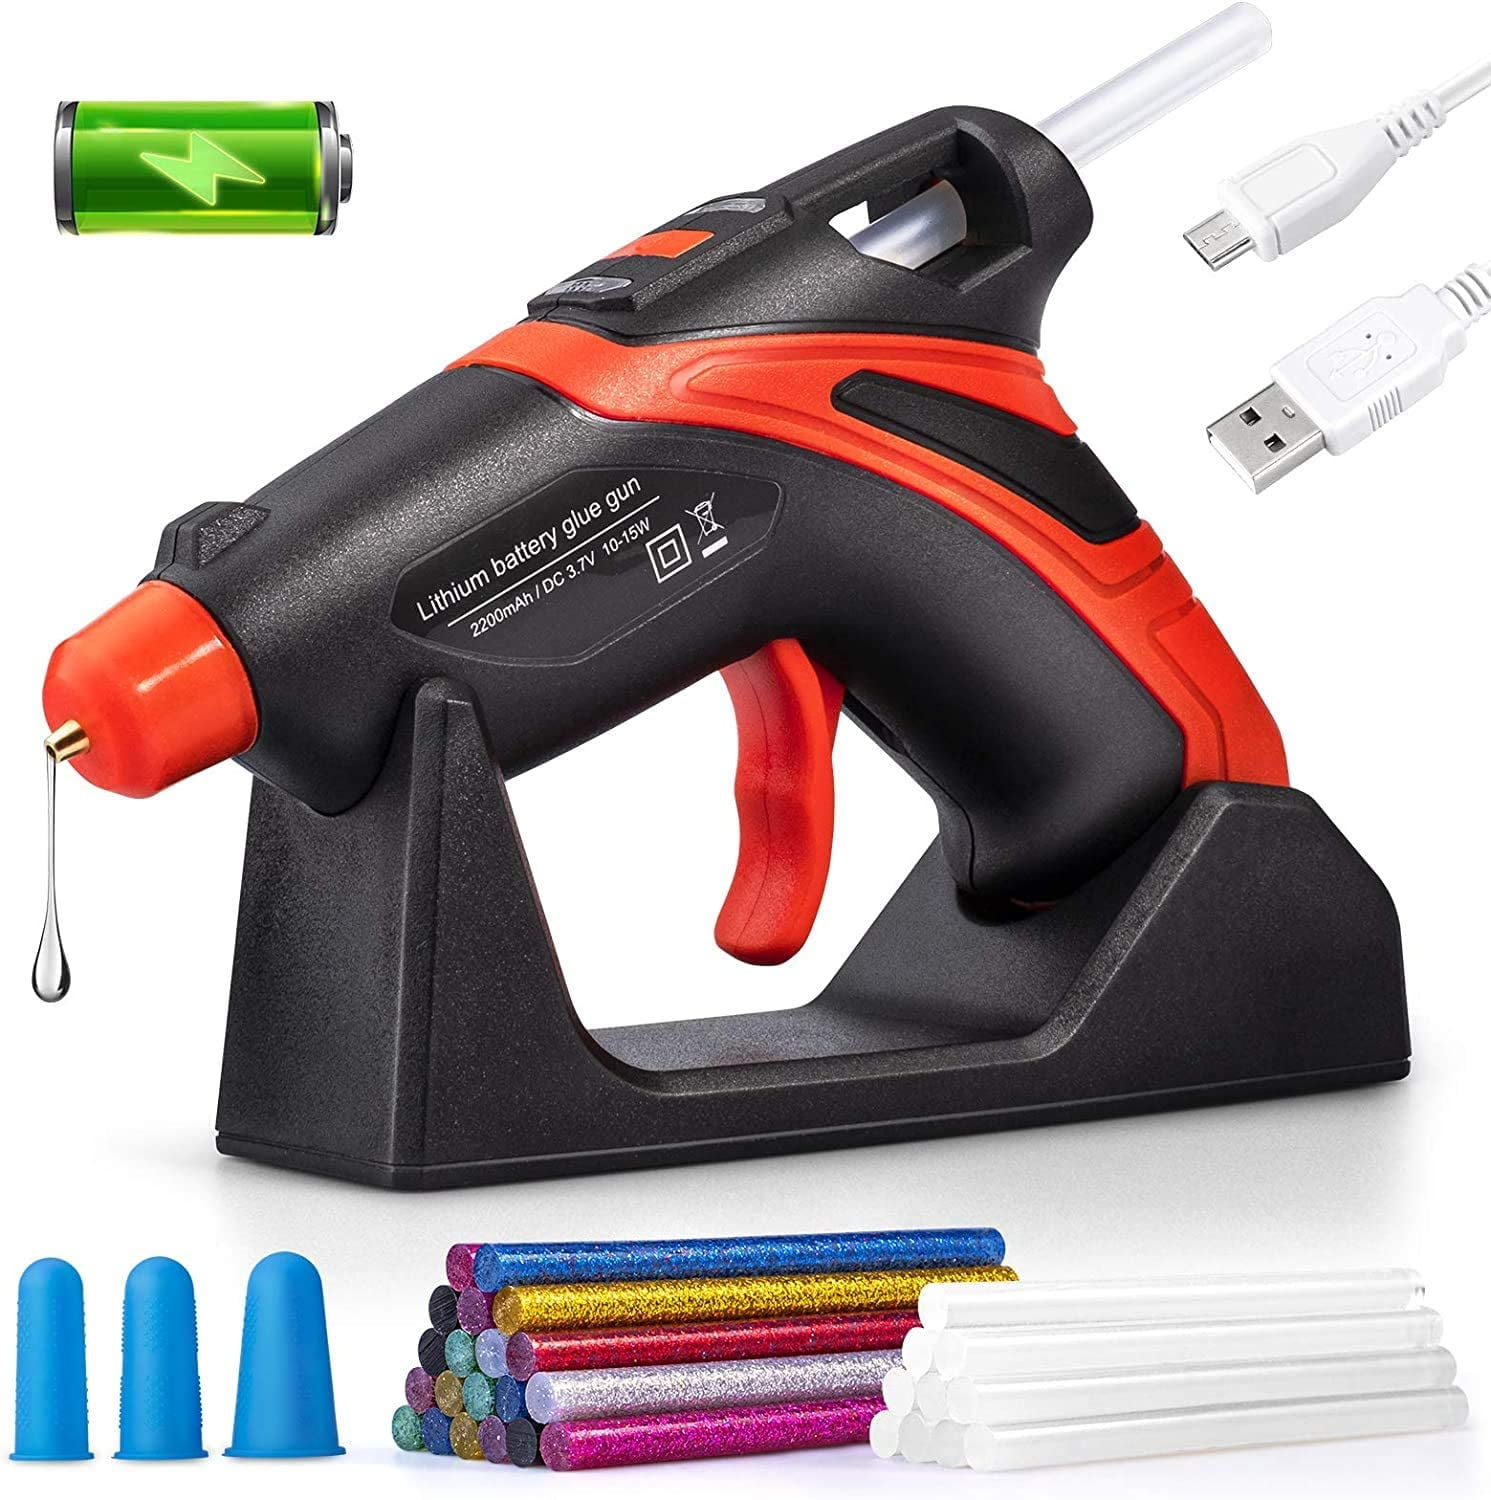 Cordless Hot Glue Gun, Handheld Radio Heavy Duty Hot Glue Gun Complete Kit  with 20 0.43 Hot Glue Sticks (Batteries Not Included) – the best products  in the Joom Geek online store